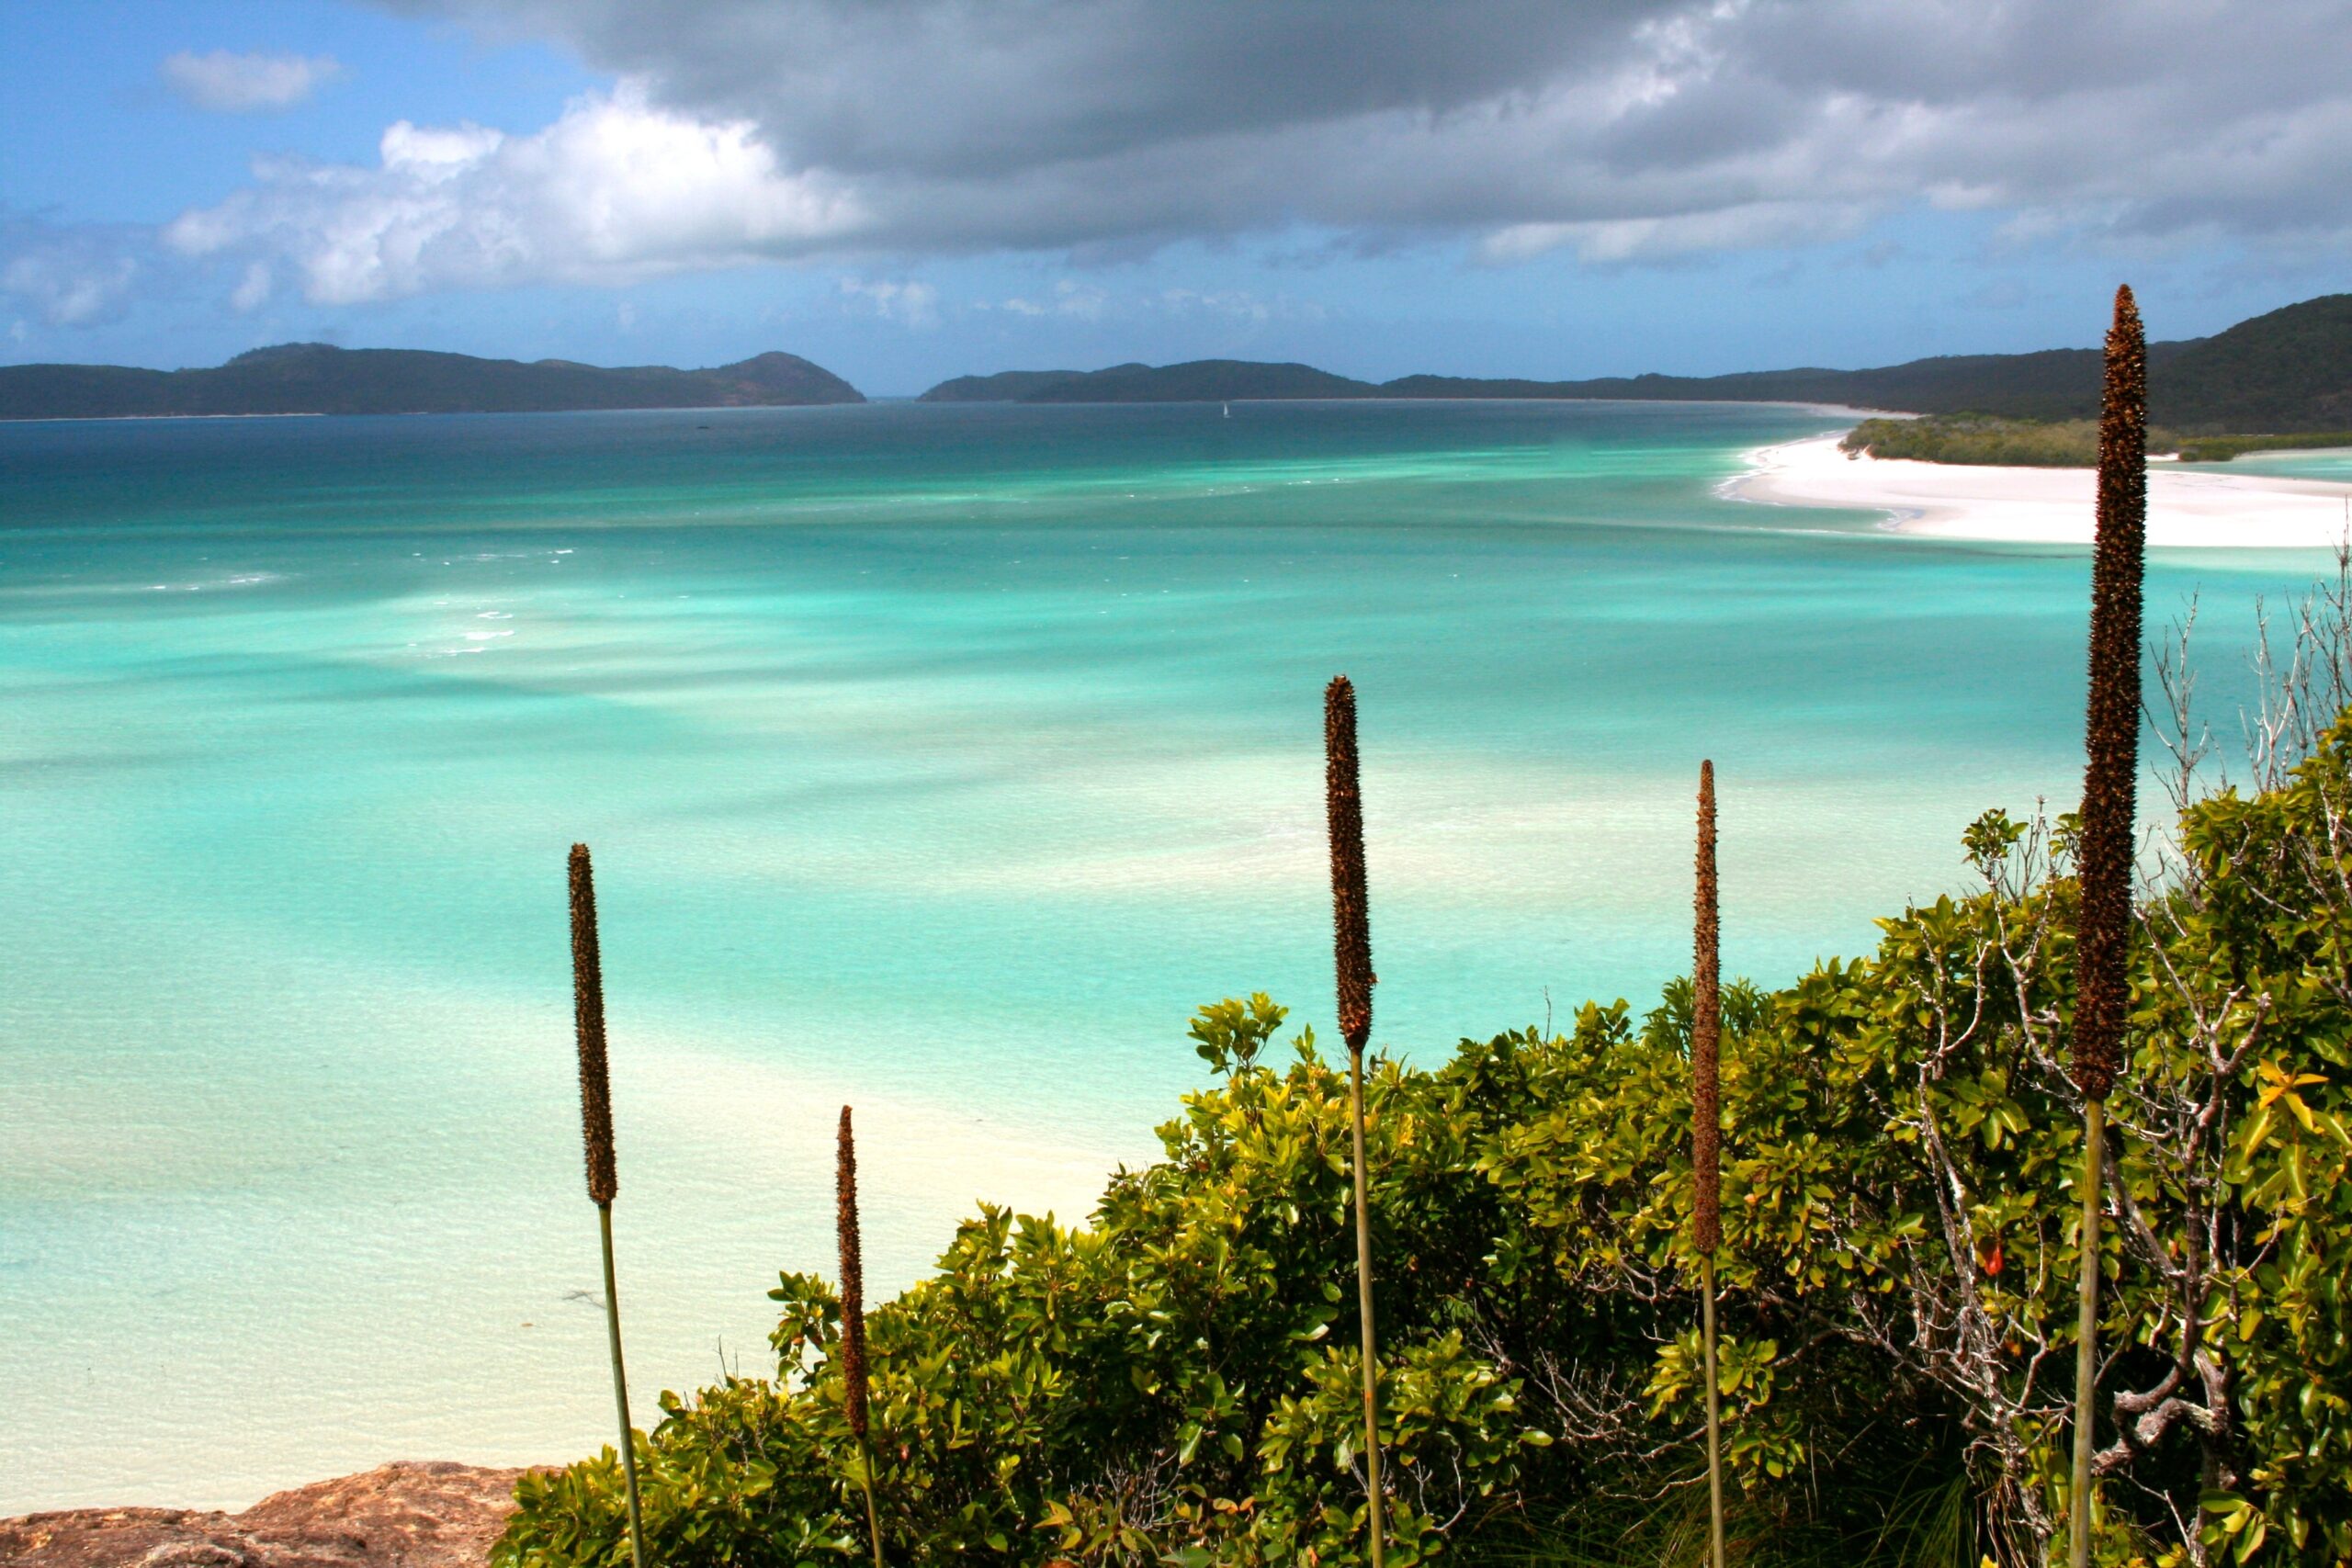 One of the best places for a beach vacation is Whitehaven Beach in Australia.